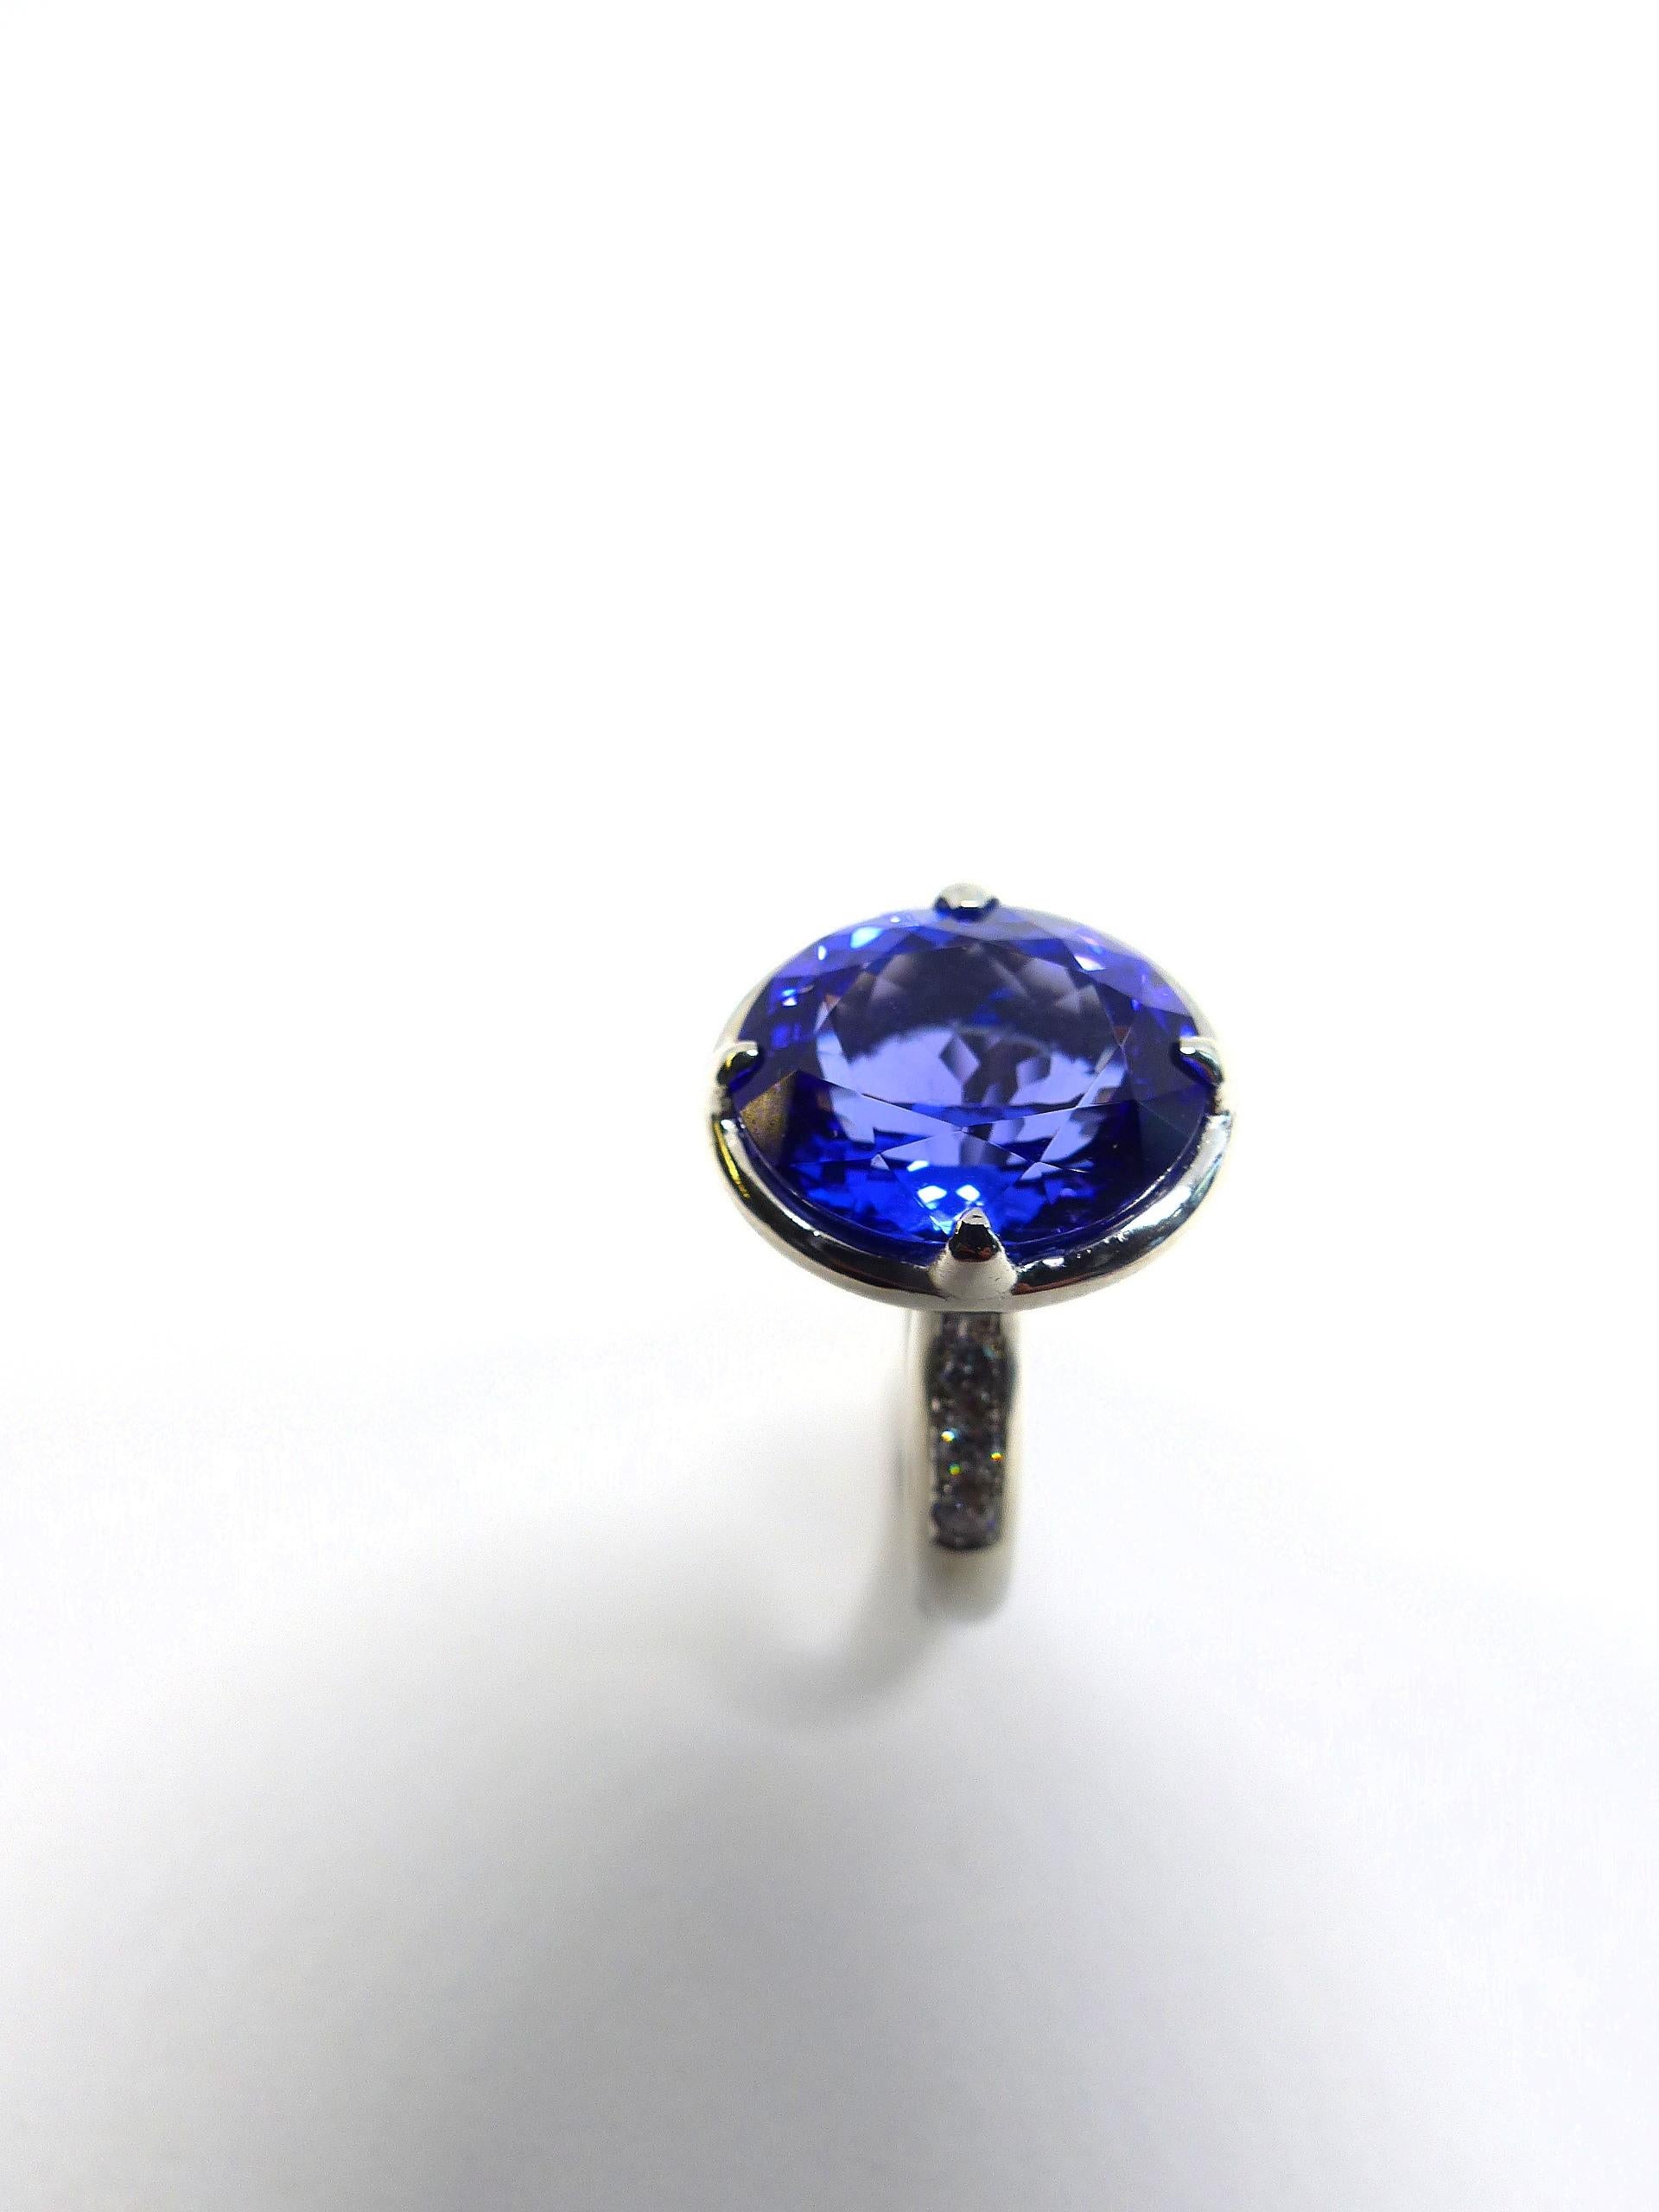 Contemporary Ring in Platinum with 1 Tanzanite oval 13x11mm, 7, 50ct. and Diamonds. For Sale